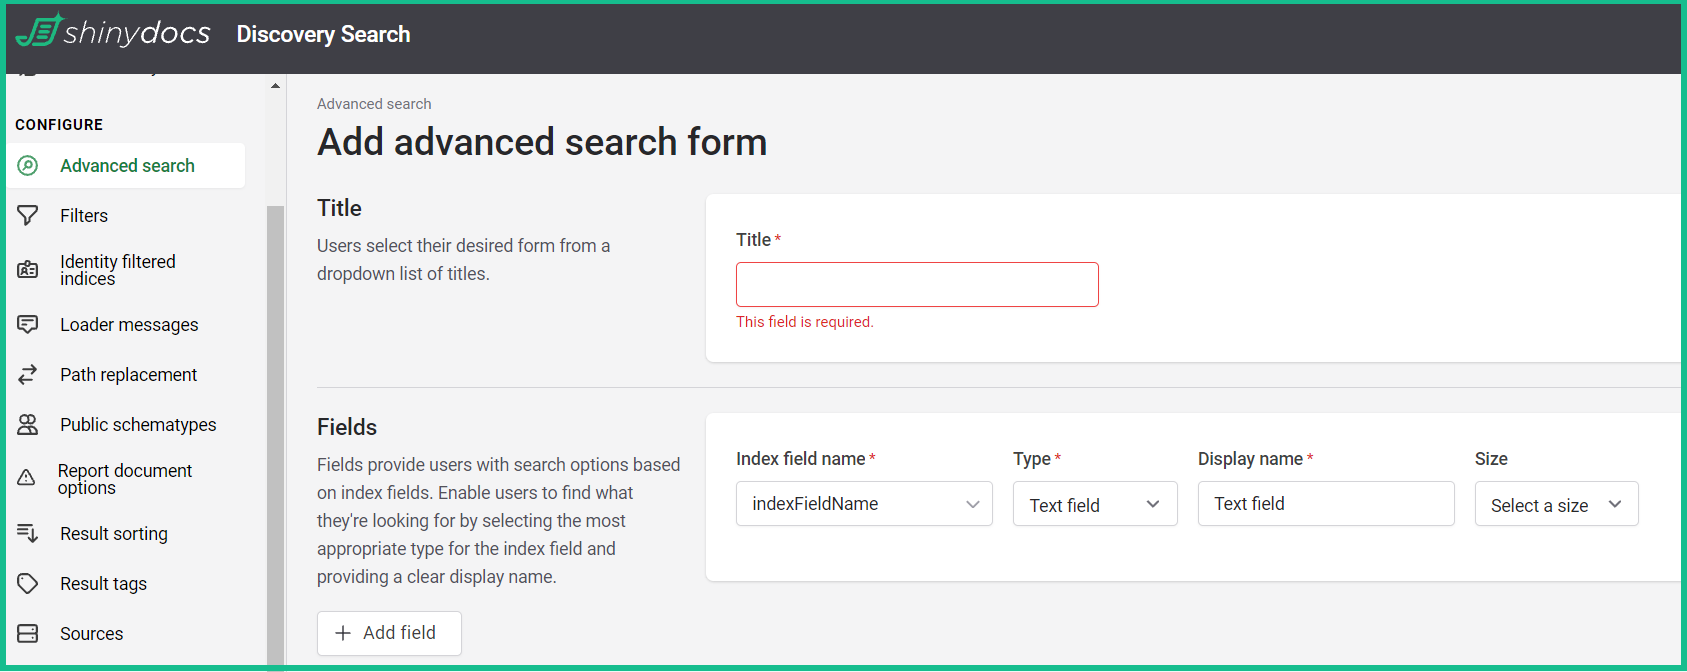 A screenshot of the Add advanced search form in the Discovery Search Admin Panel